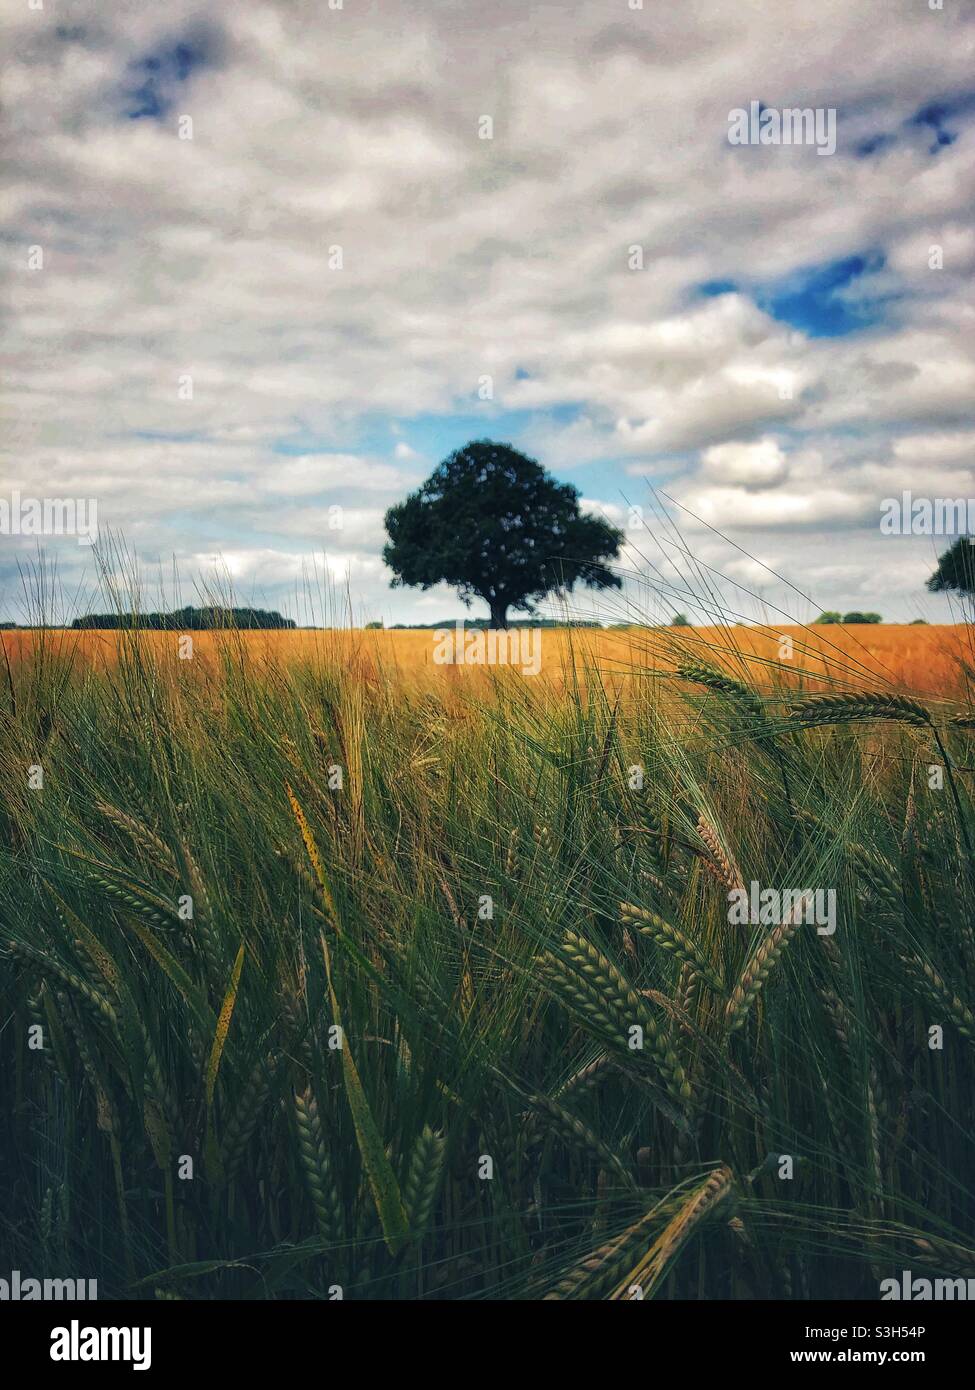 A nature background image of fields of golden wheat or barley and alone tree in the distance Stock Photo